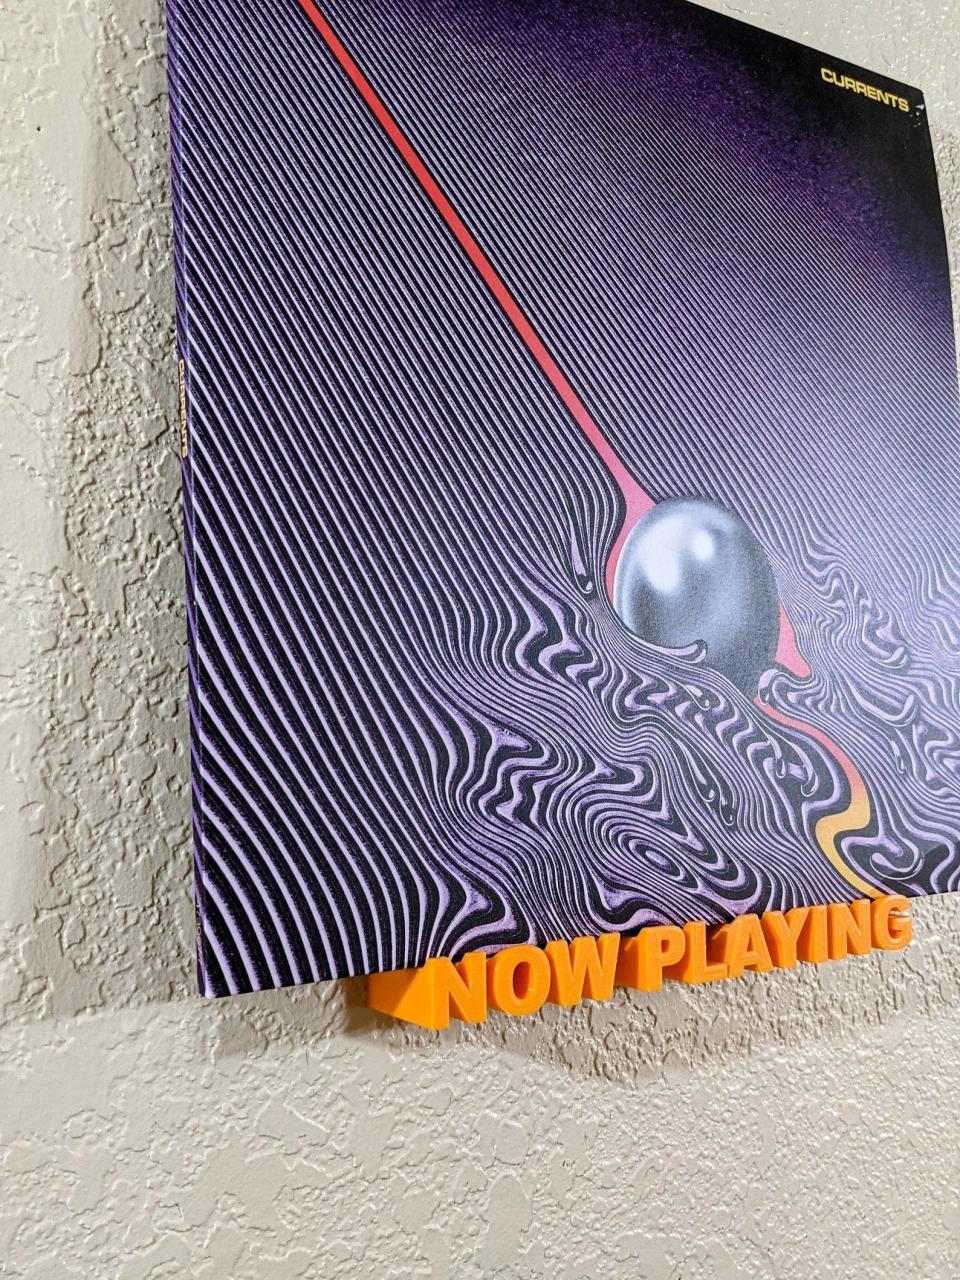 'Now Playing' Wall Mounted Record Display Shelf